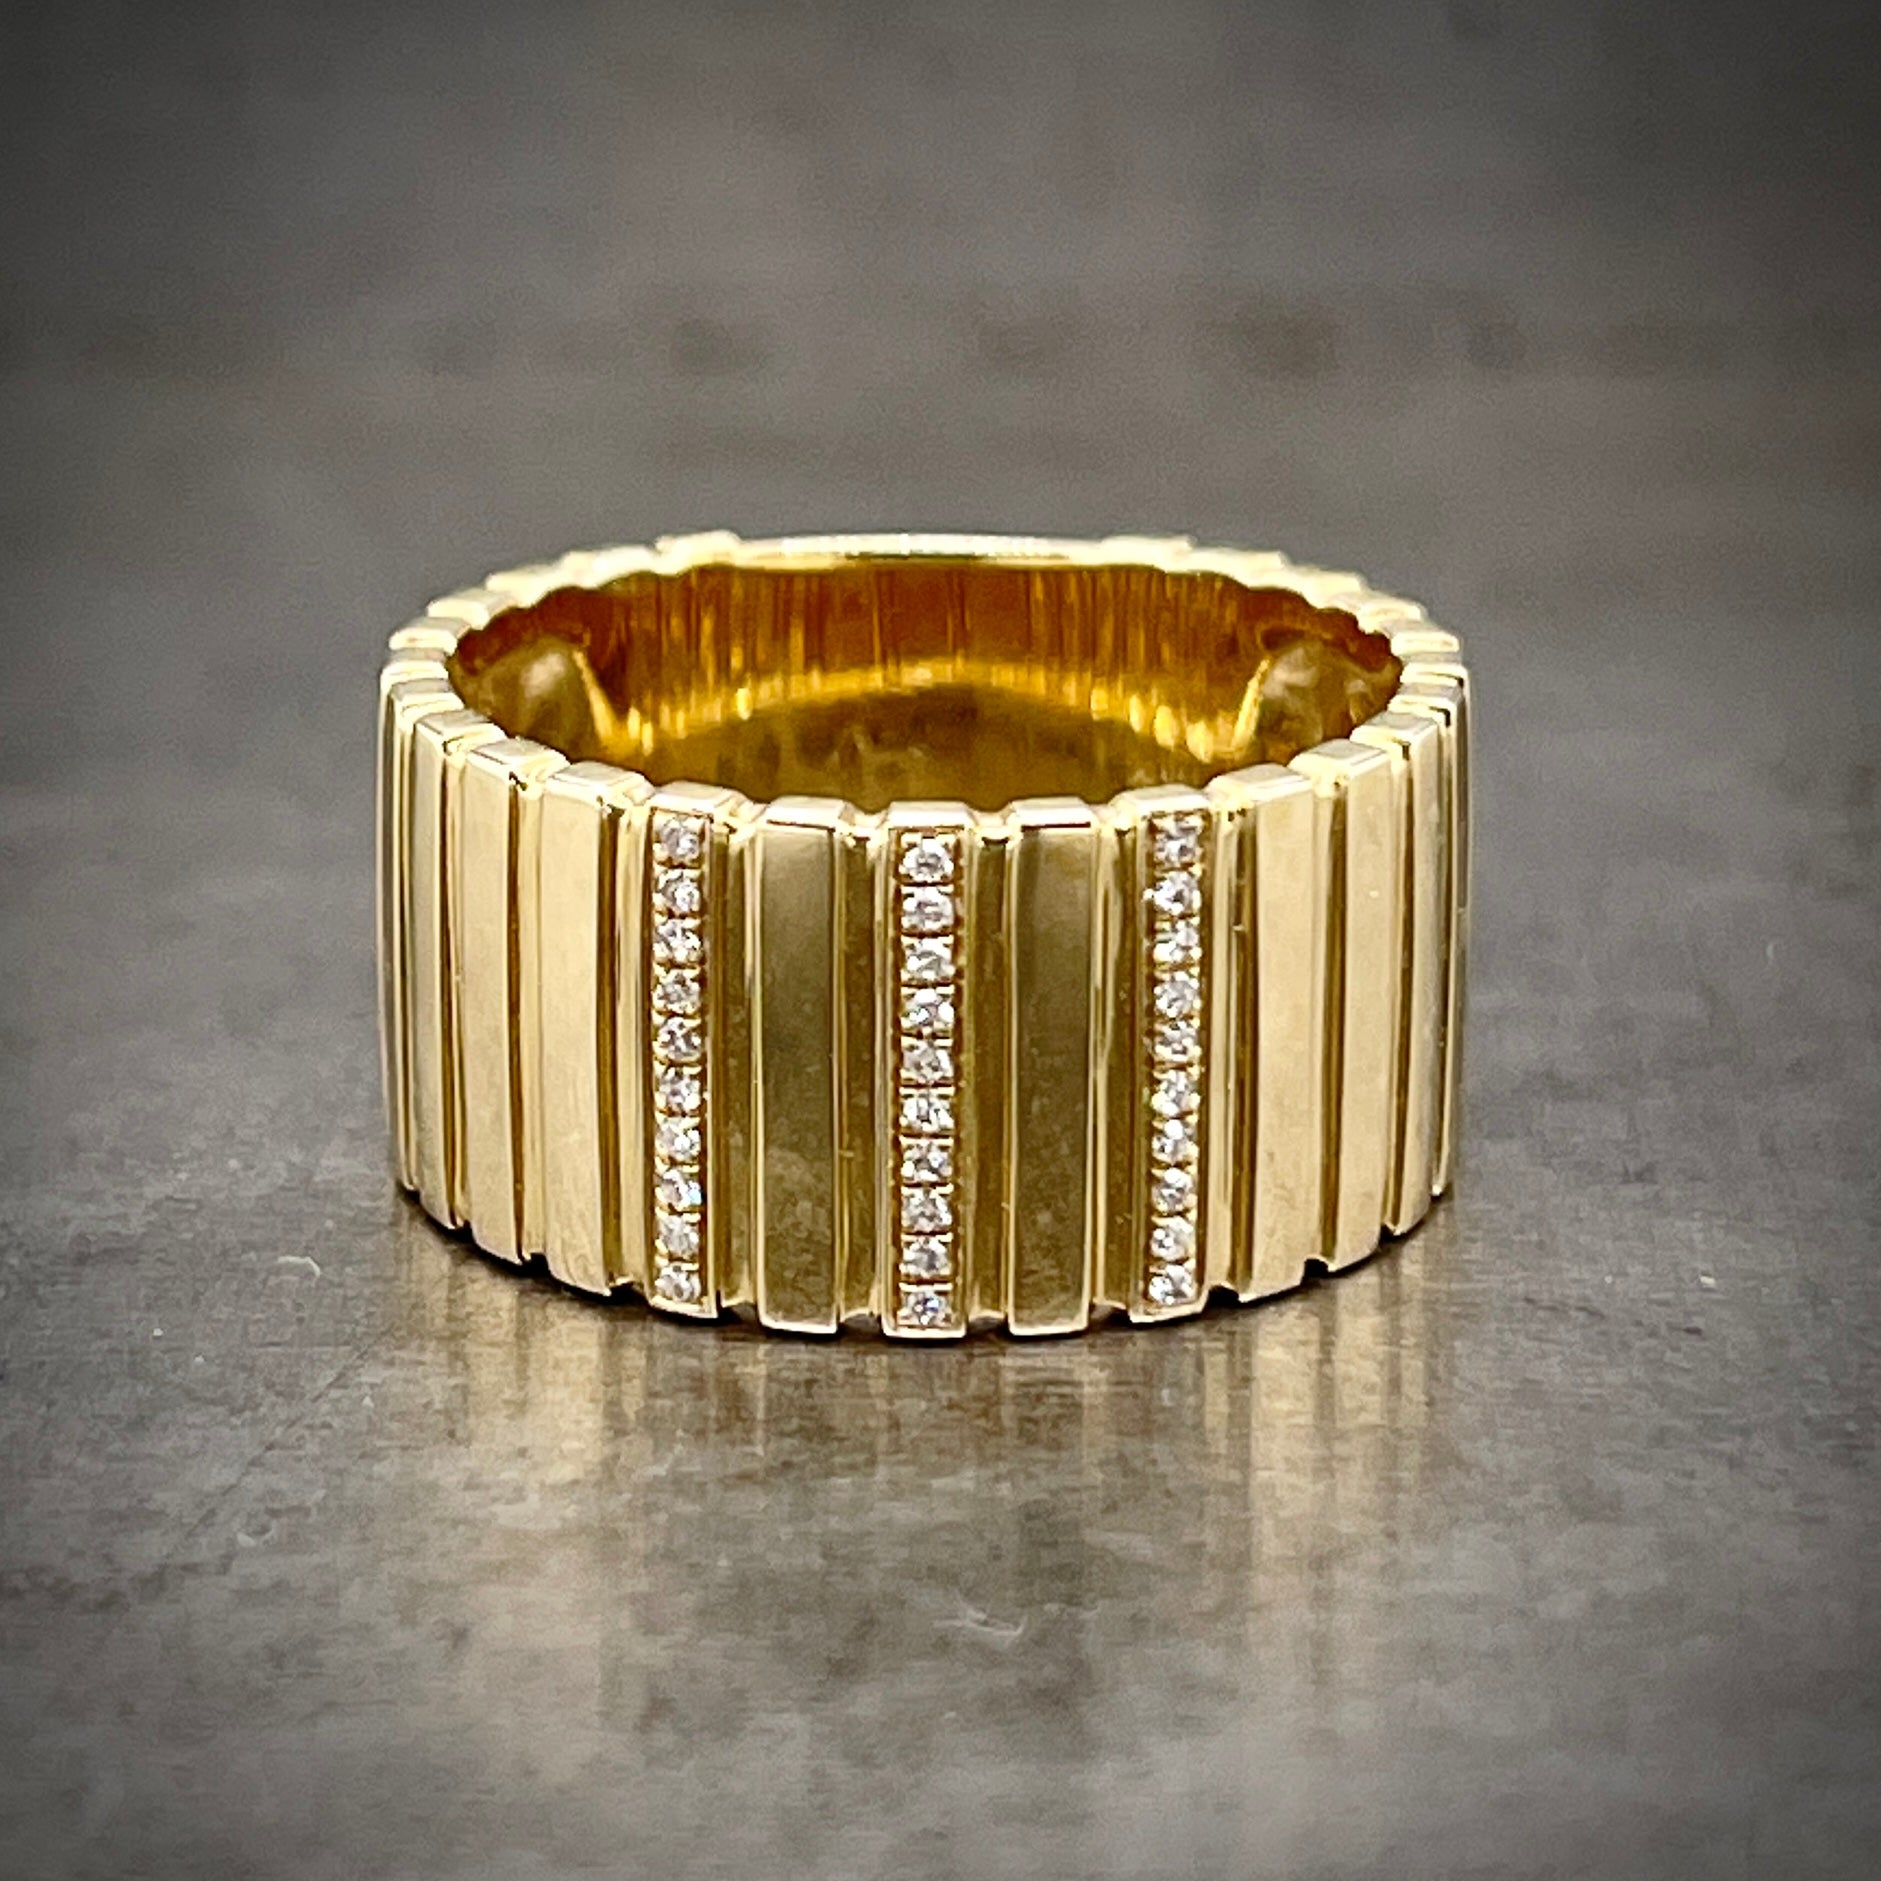 Full view of diamond cigarette band laying down. This band features bars/rectangles of gold through ring. The middle bar features ten round brilliant diamond that cover the entire rectangle. Two rectangles over from either side is another row of diamonds.